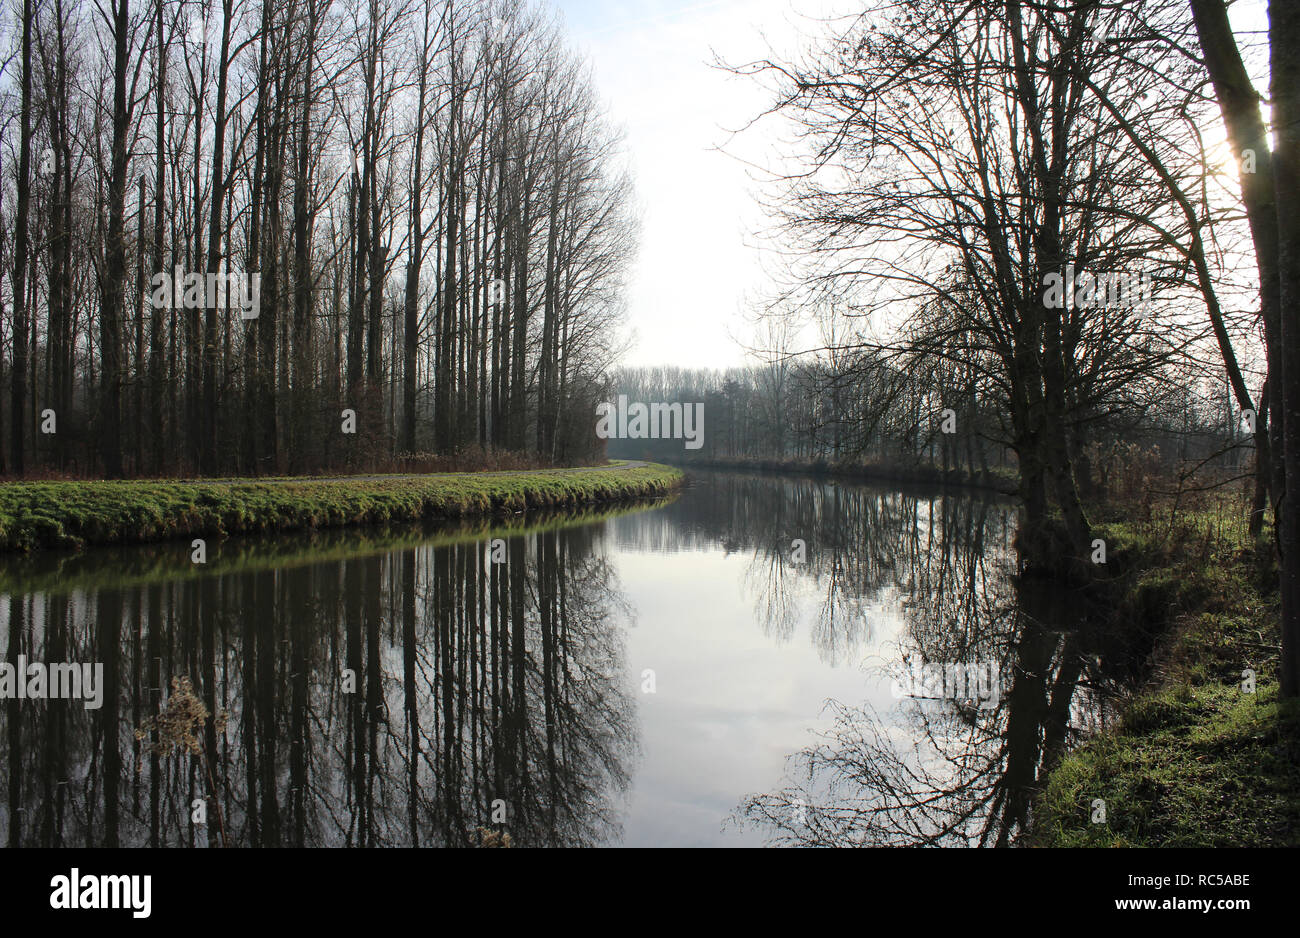 Lovely winter view of the River Dender and trees reflected in the water, as it flows near Welle in East Flanders in Belgium. Stock Photo